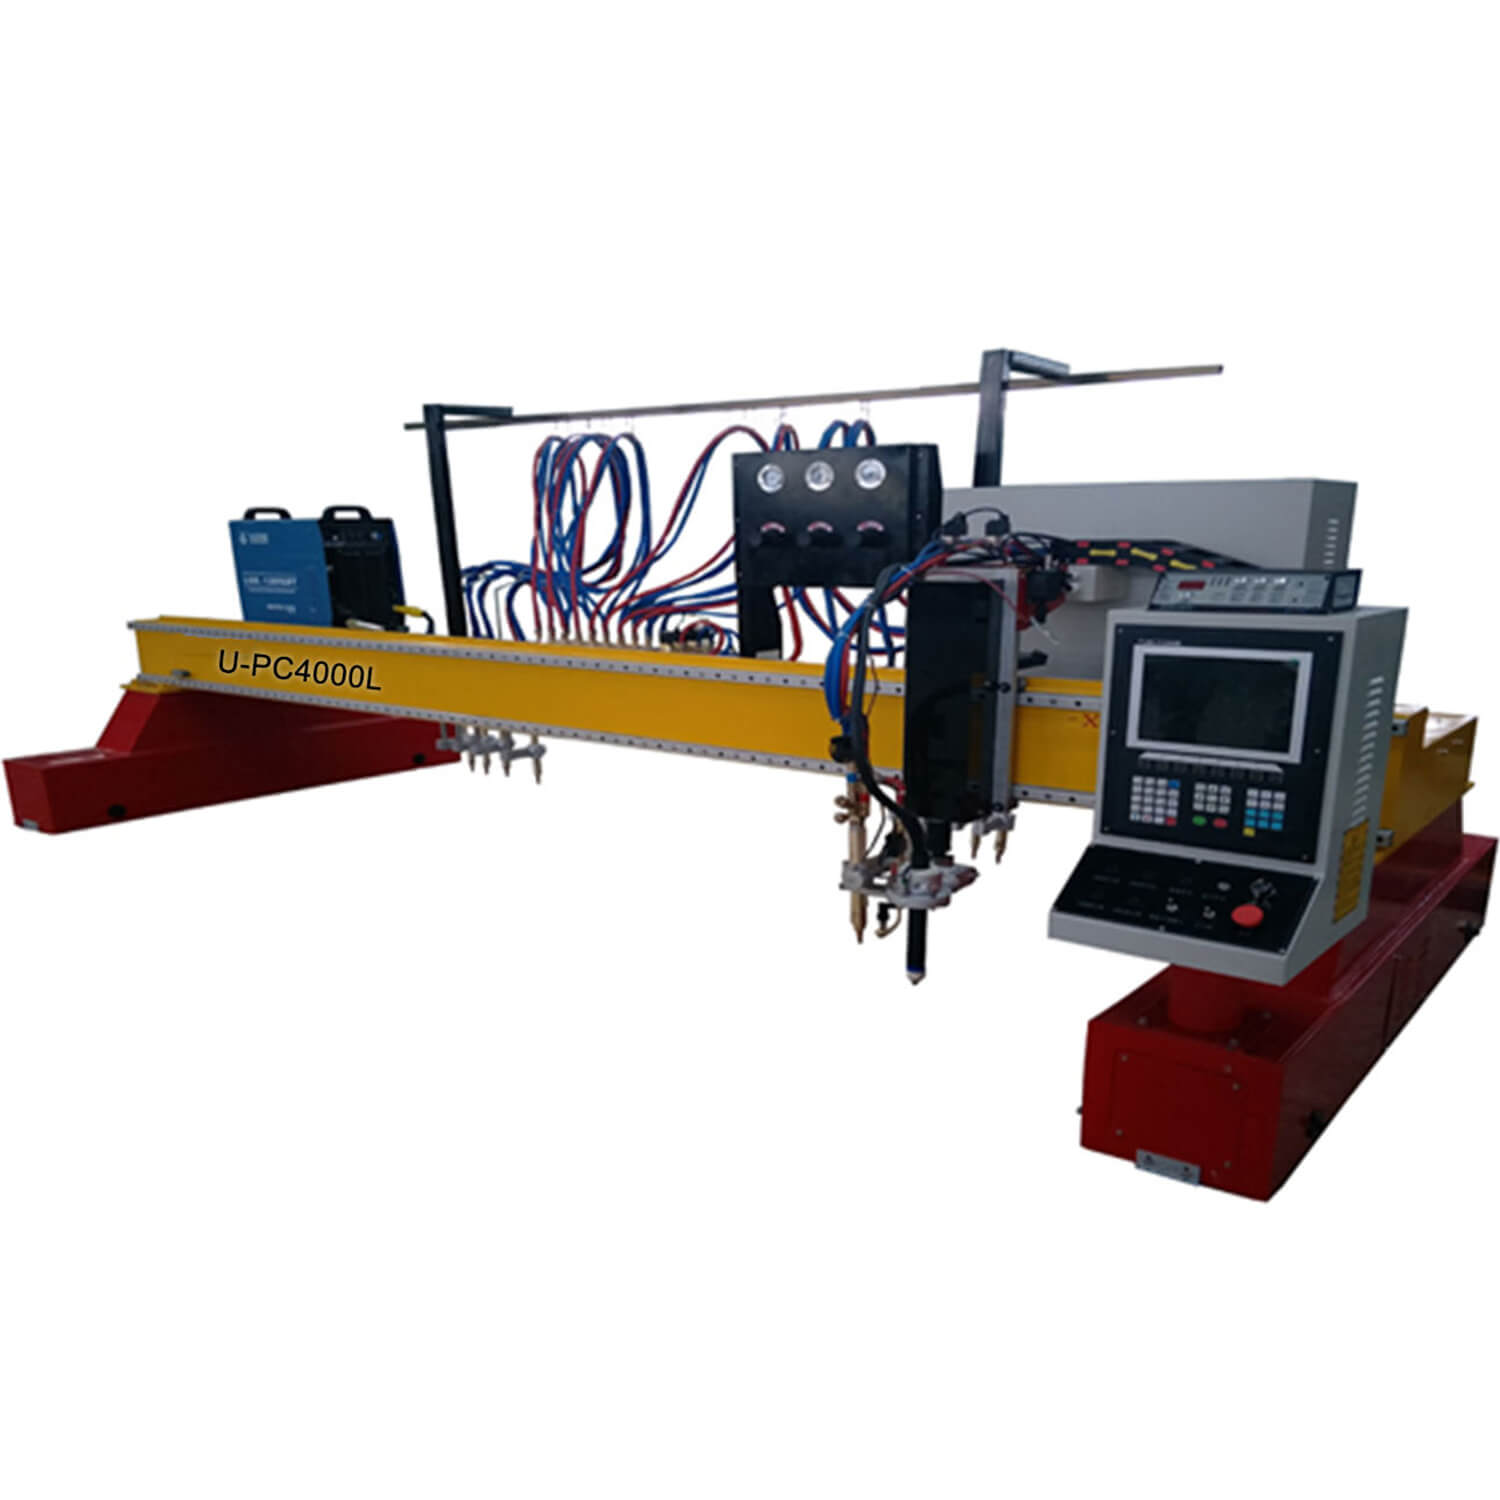 Industrial Cnc Plasma Cutter With Multi Oxy-Fuel Torches & Plasma Torch For Mass Fabrication 